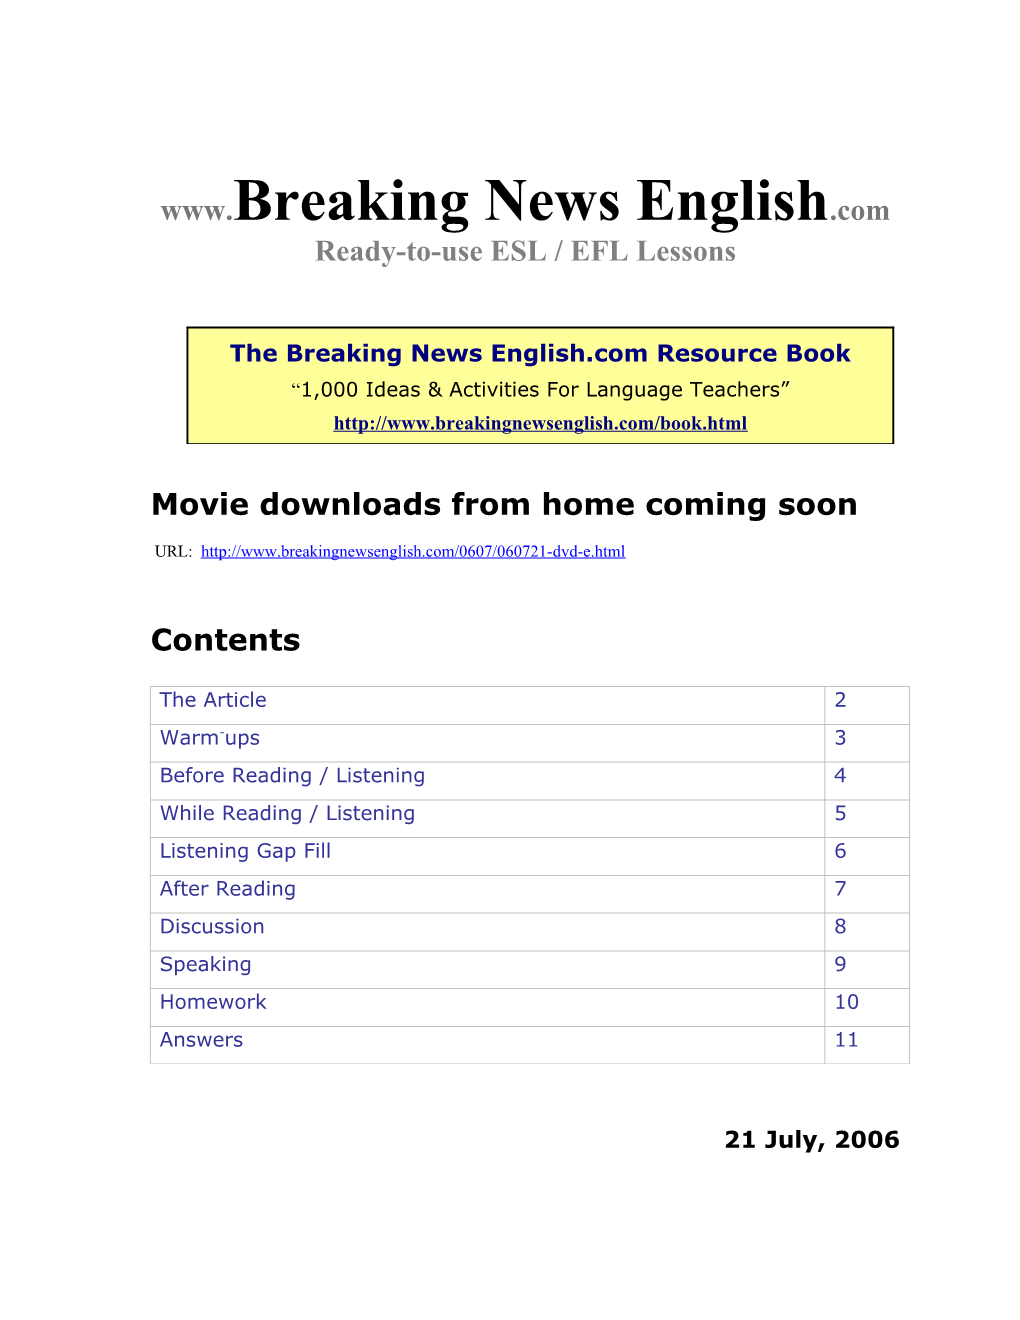 Movie Downloads from Home Coming Soon